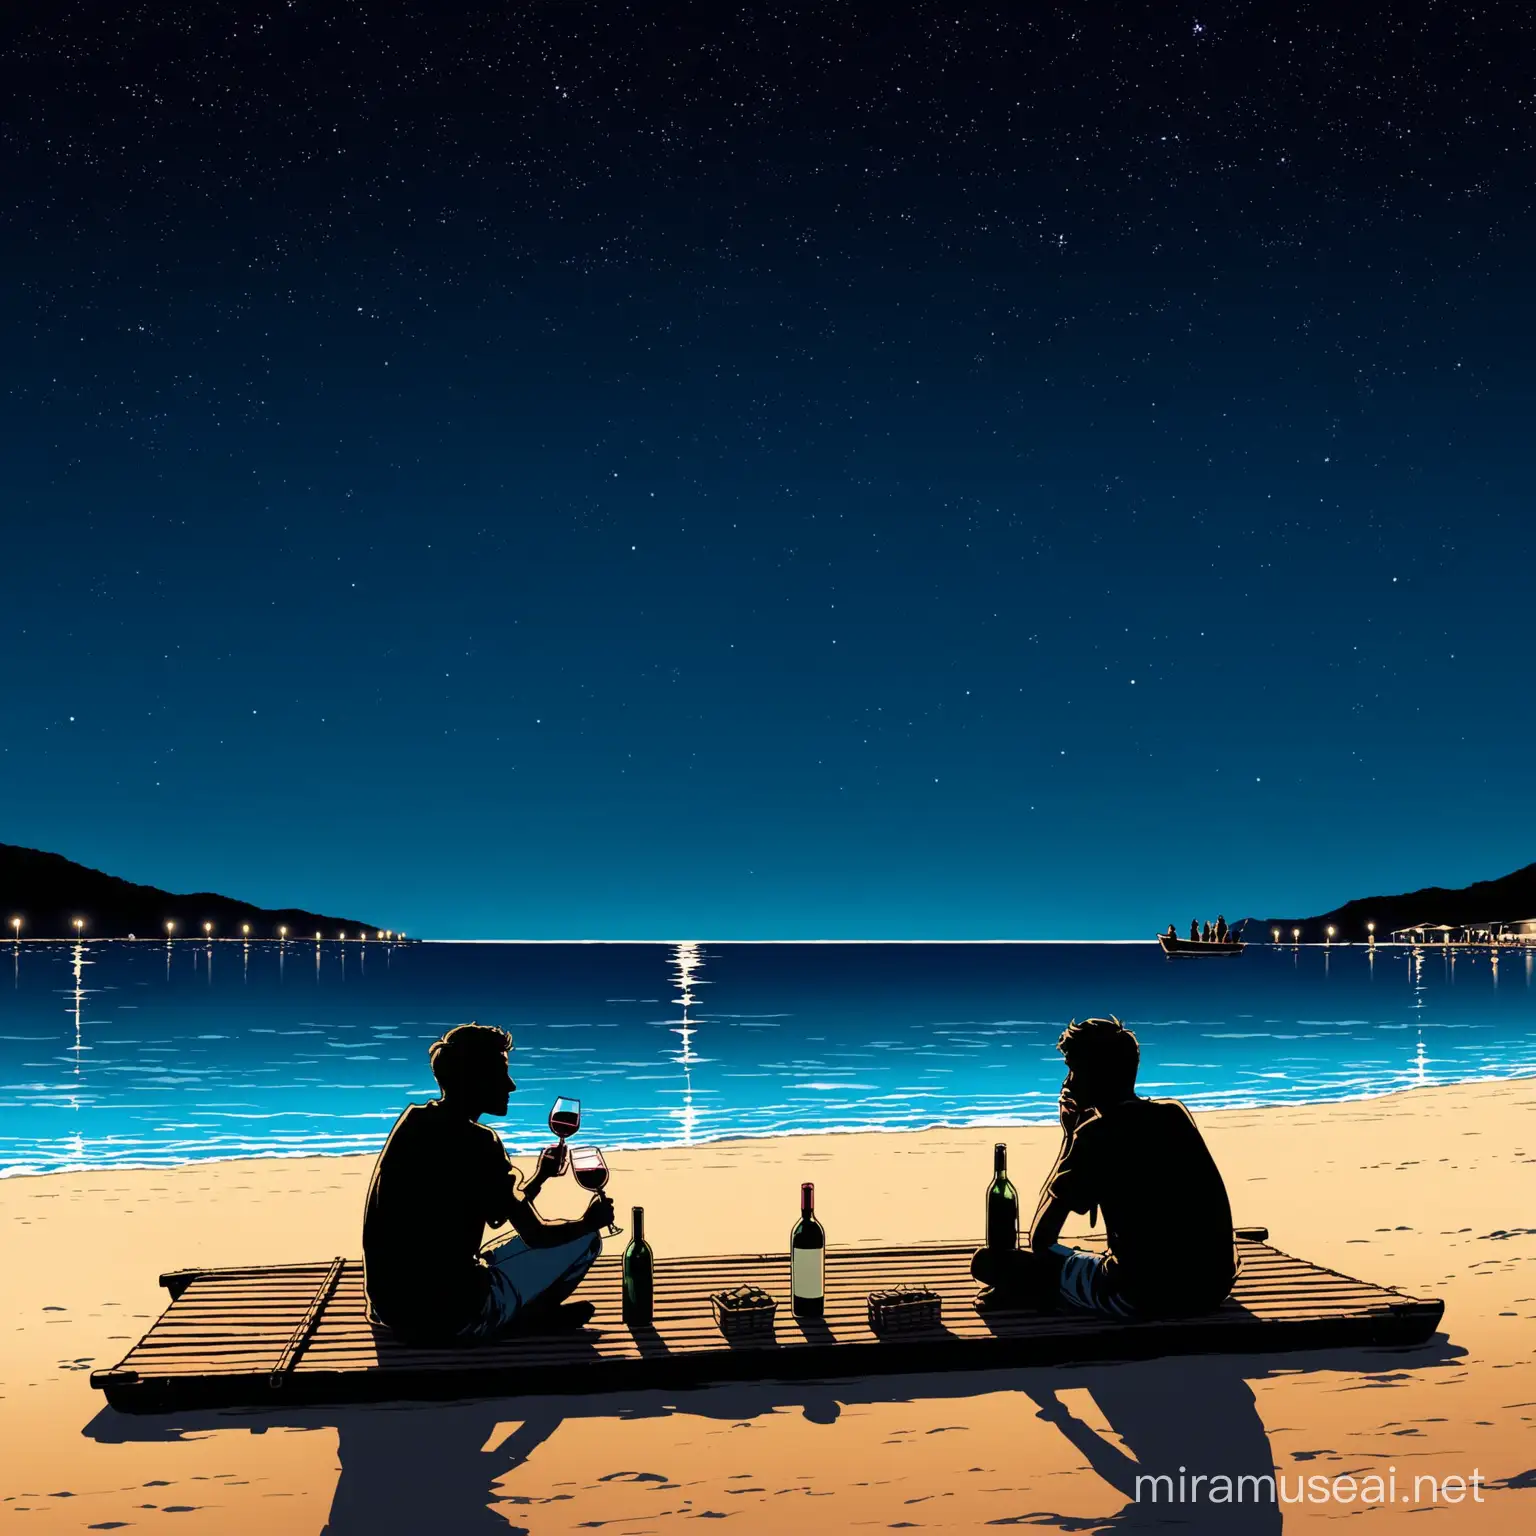 The story is about two young men, one 25, one 27 years old, and they are on a raft, a boat, on the sand. The year is 1990, both young men are silhouetted from behind or from the side, drinking wine from a single bottle. No one is with them. They are wearing casual shirt trousers, not sea shorts, and they are drinking wine directly from the bottle, not from a glass. They are having a sad conversation about their grandfathers, the past and their childhood. The sky is dark and starry, and the lights of the Aegean coast of Turkey can be seen on the opposite shore. A little to the right of where the two young men are sitting, we can see a taverna with people having fun. 